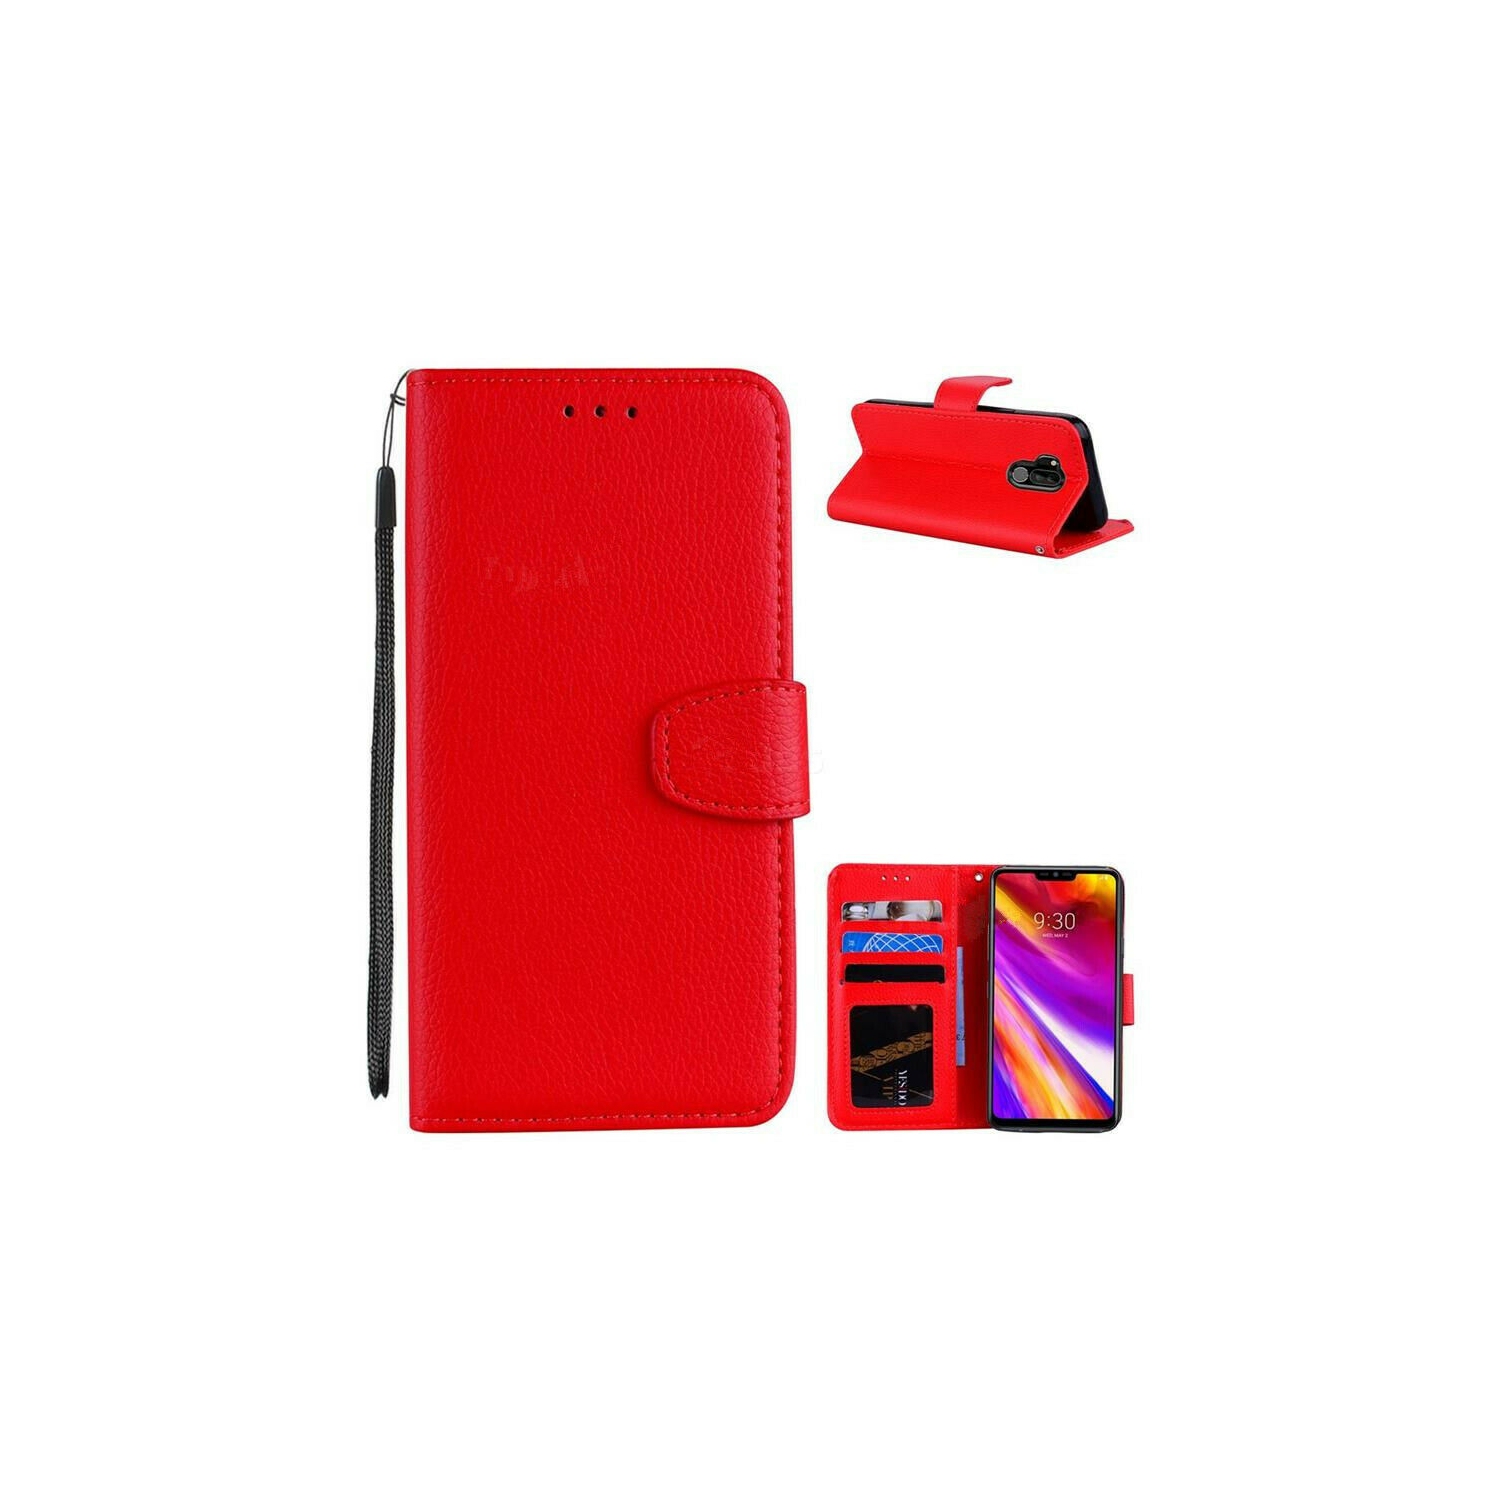 [CS] LG G7 ThinQ / G7 One Case, Magnetic Leather Folio Wallet Flip Case Cover with Card Slot, Red